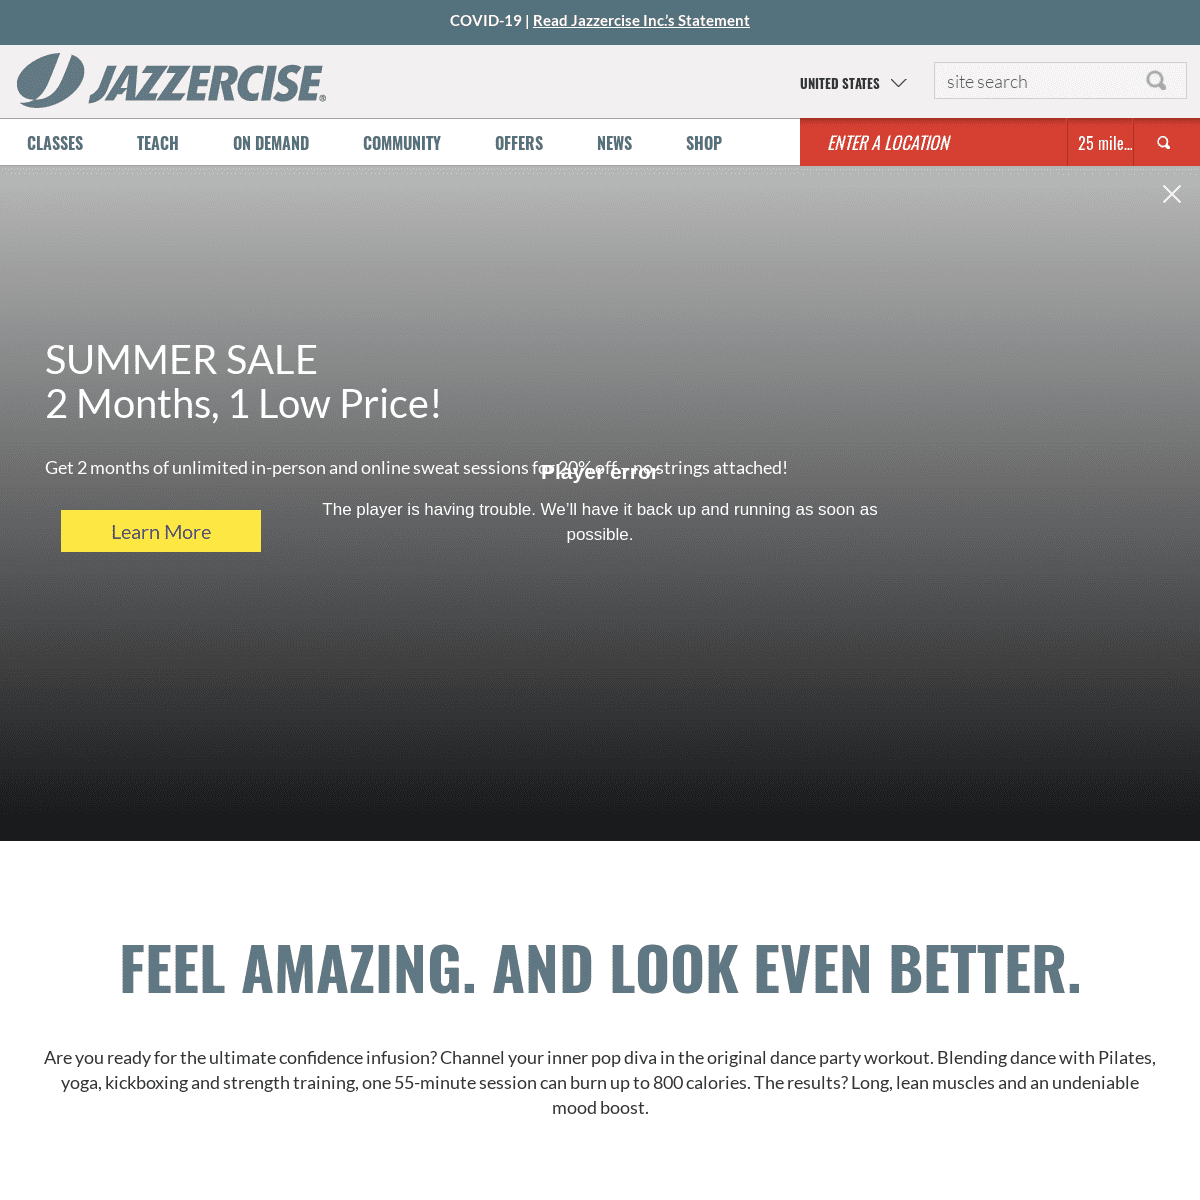 A complete backup of https://jazzercise.com